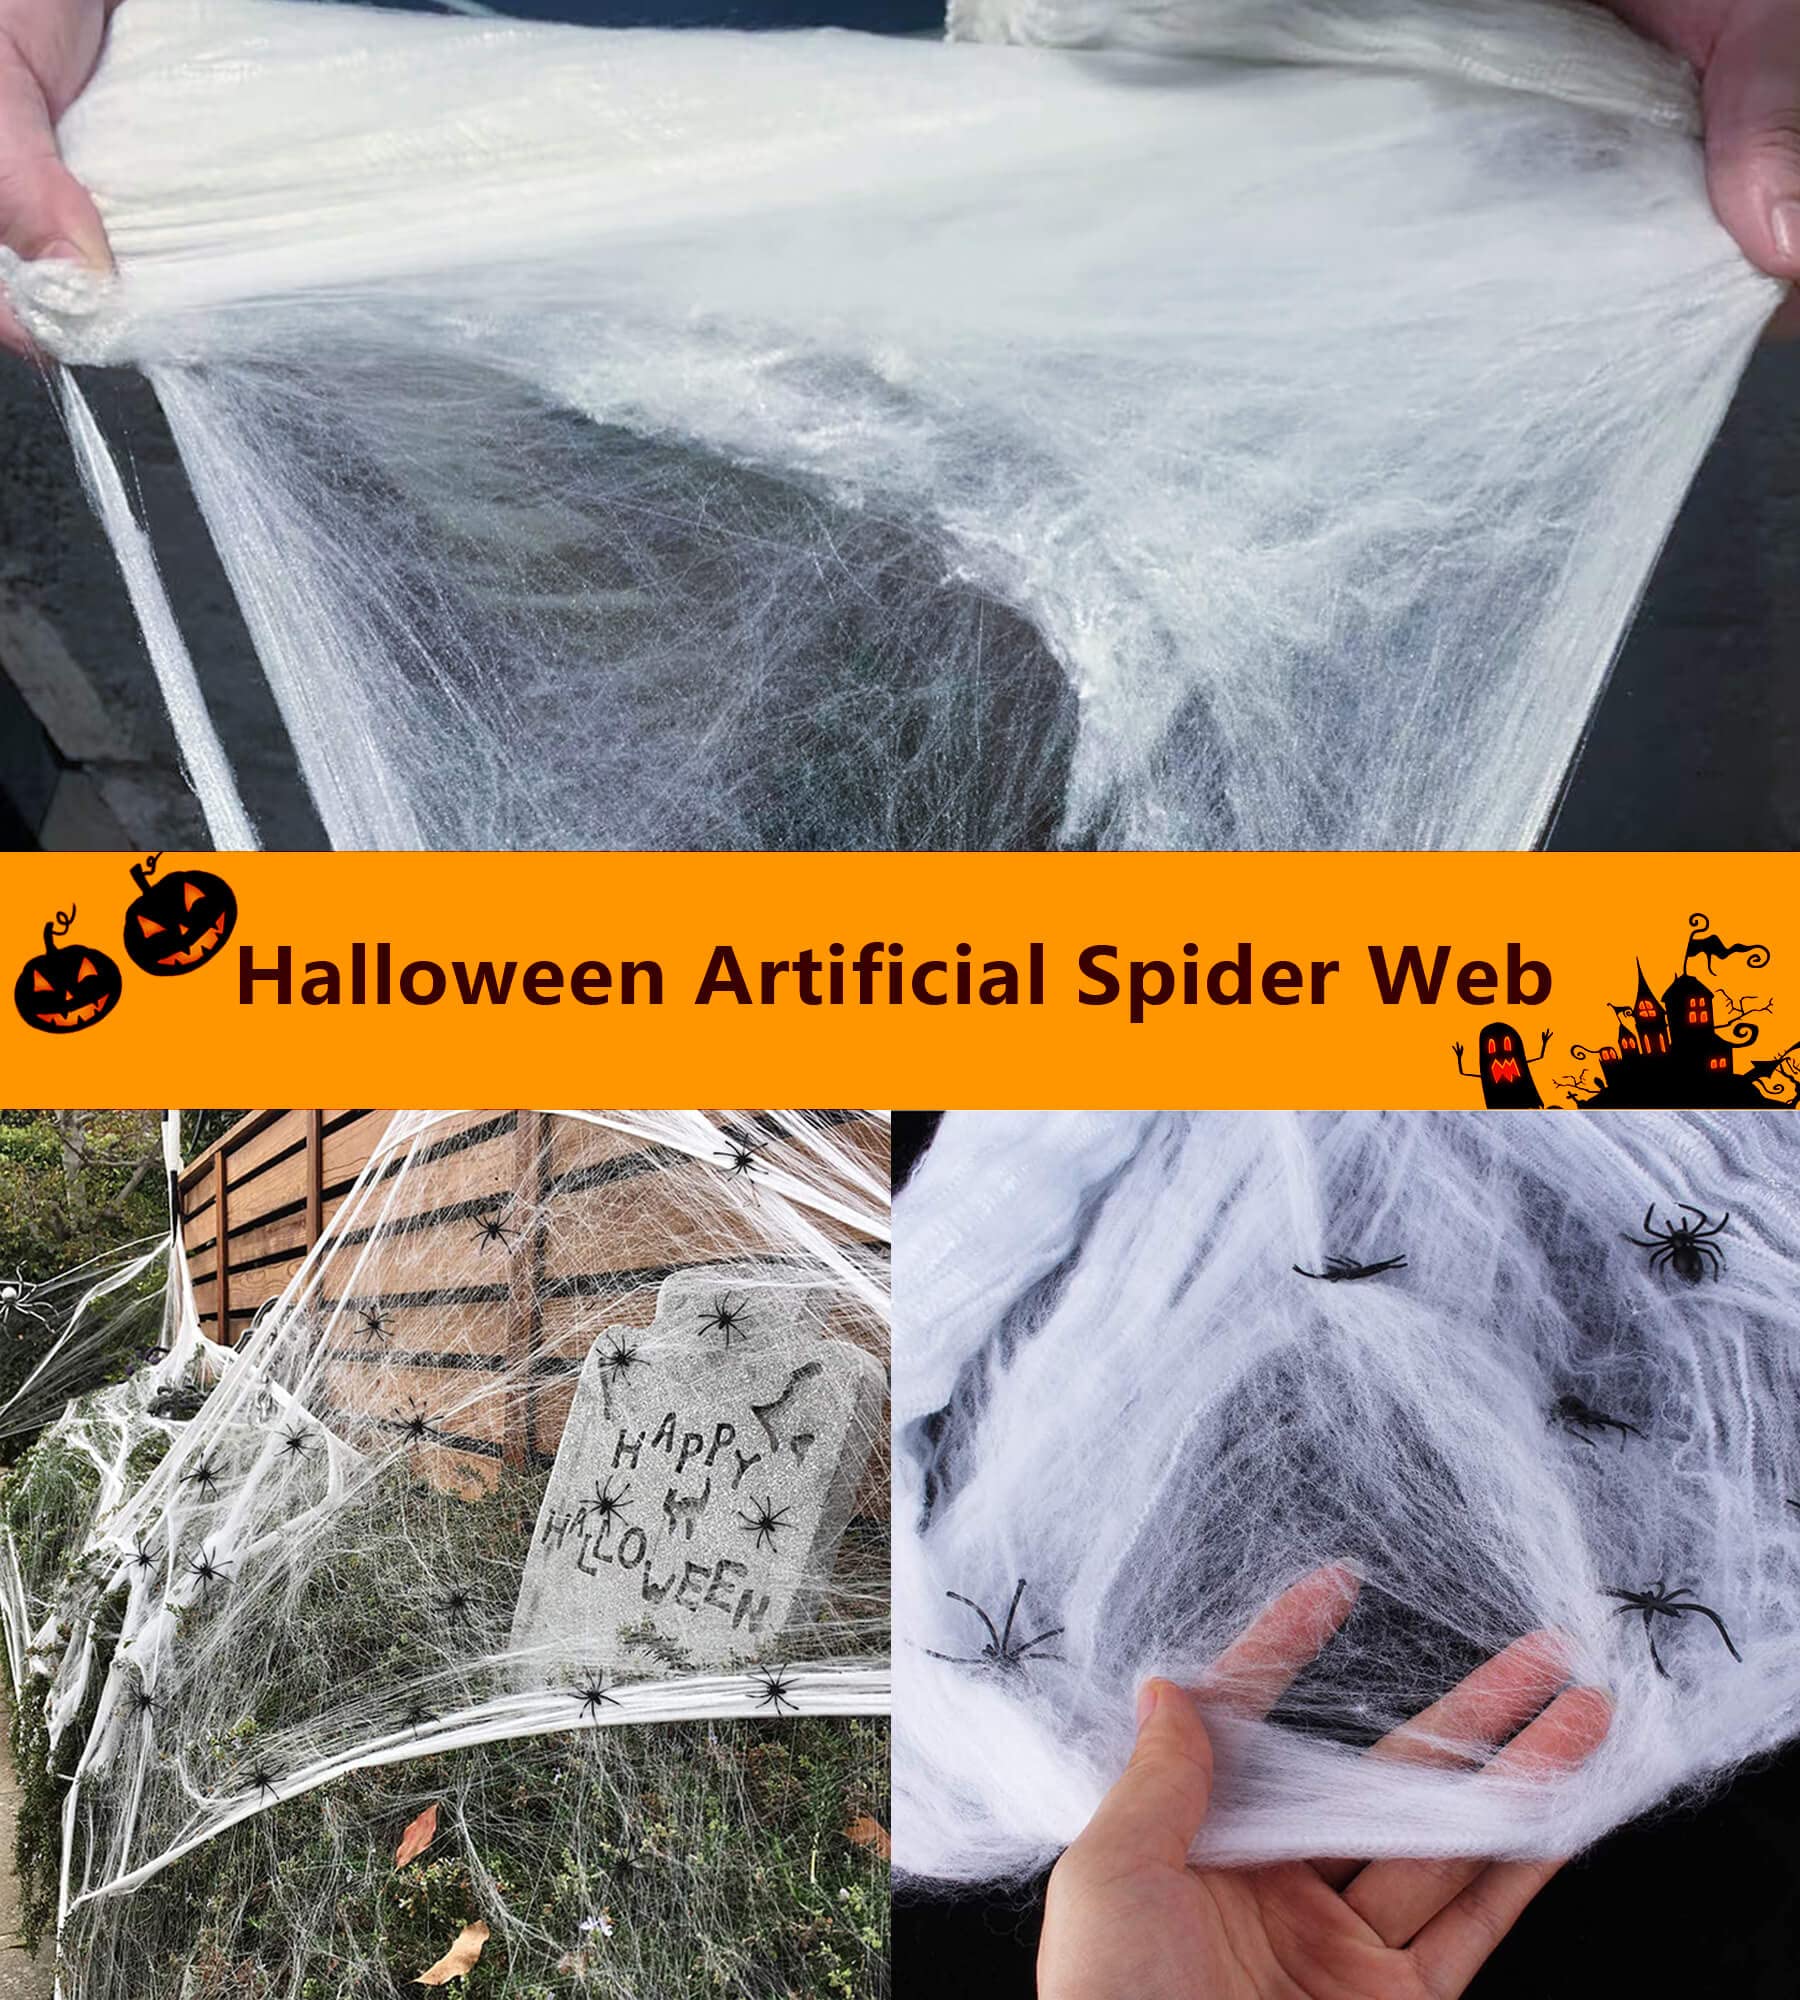 CRILEAL Skeleton Animated Halloween Decorations, Screaming Halloween Decor with Motion Activated & Light Sensor, Spooky Prisoner Cage with Spider Web Haunted House Decorations, Ghost with Hat